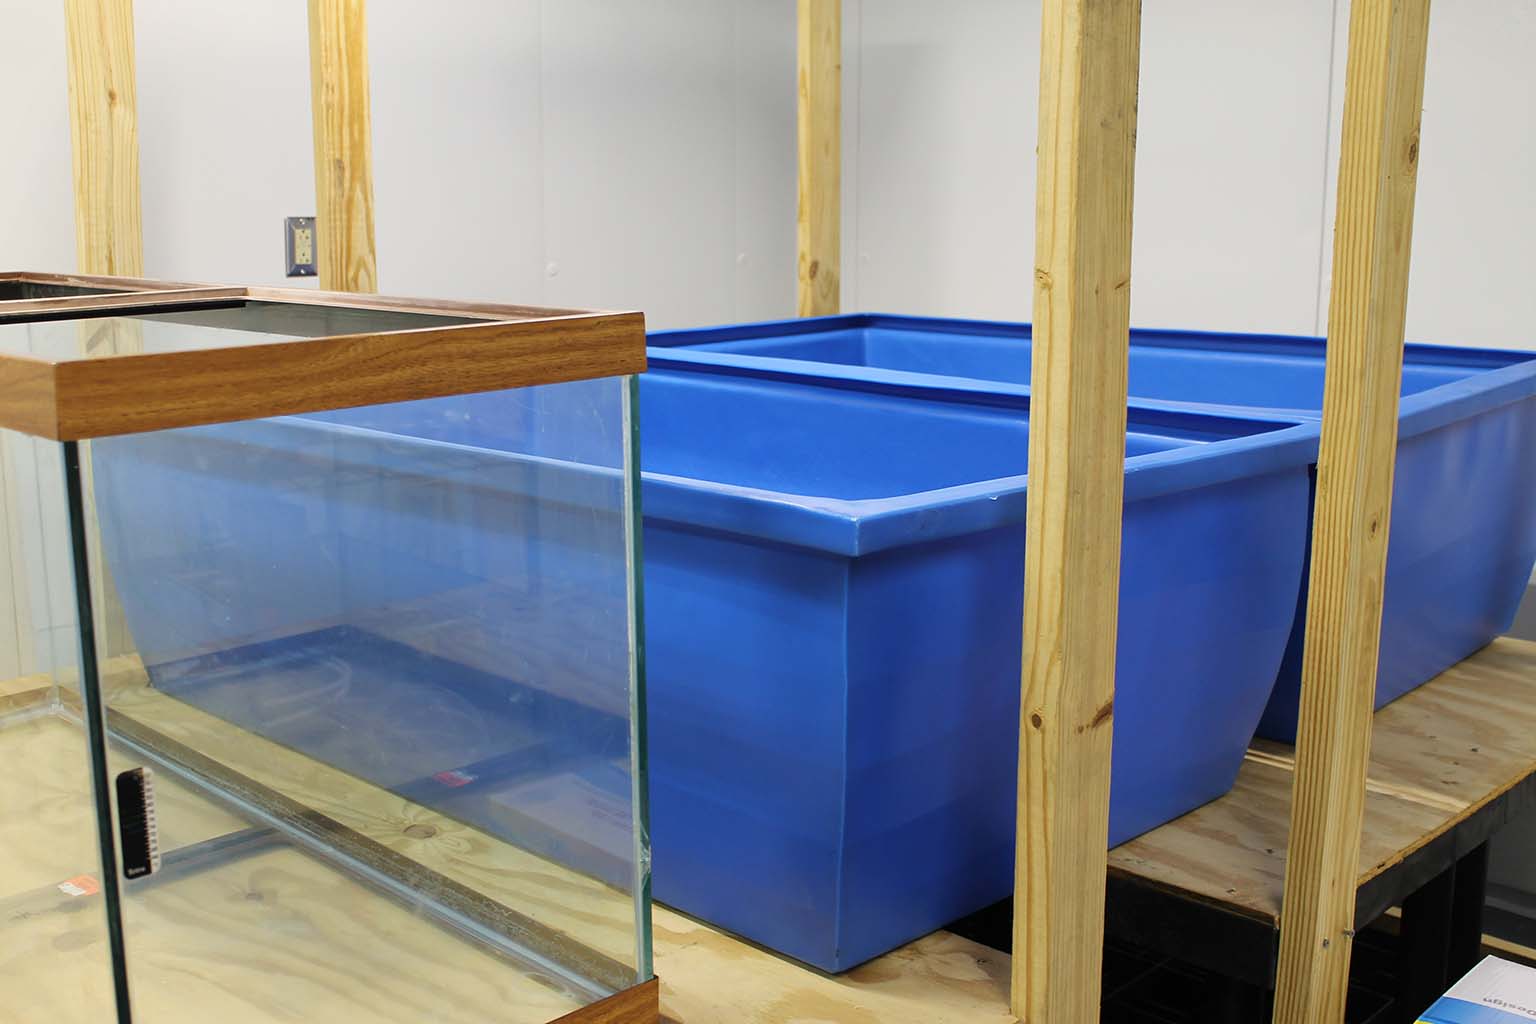 An empty "mother tank" (approxiately 50-gallon glass-sided aquarium tank) and two empty "experimental tanks" (long, blue plastic tubs slightly larger than the "mother tank") sit side-by-side on a plywood table.